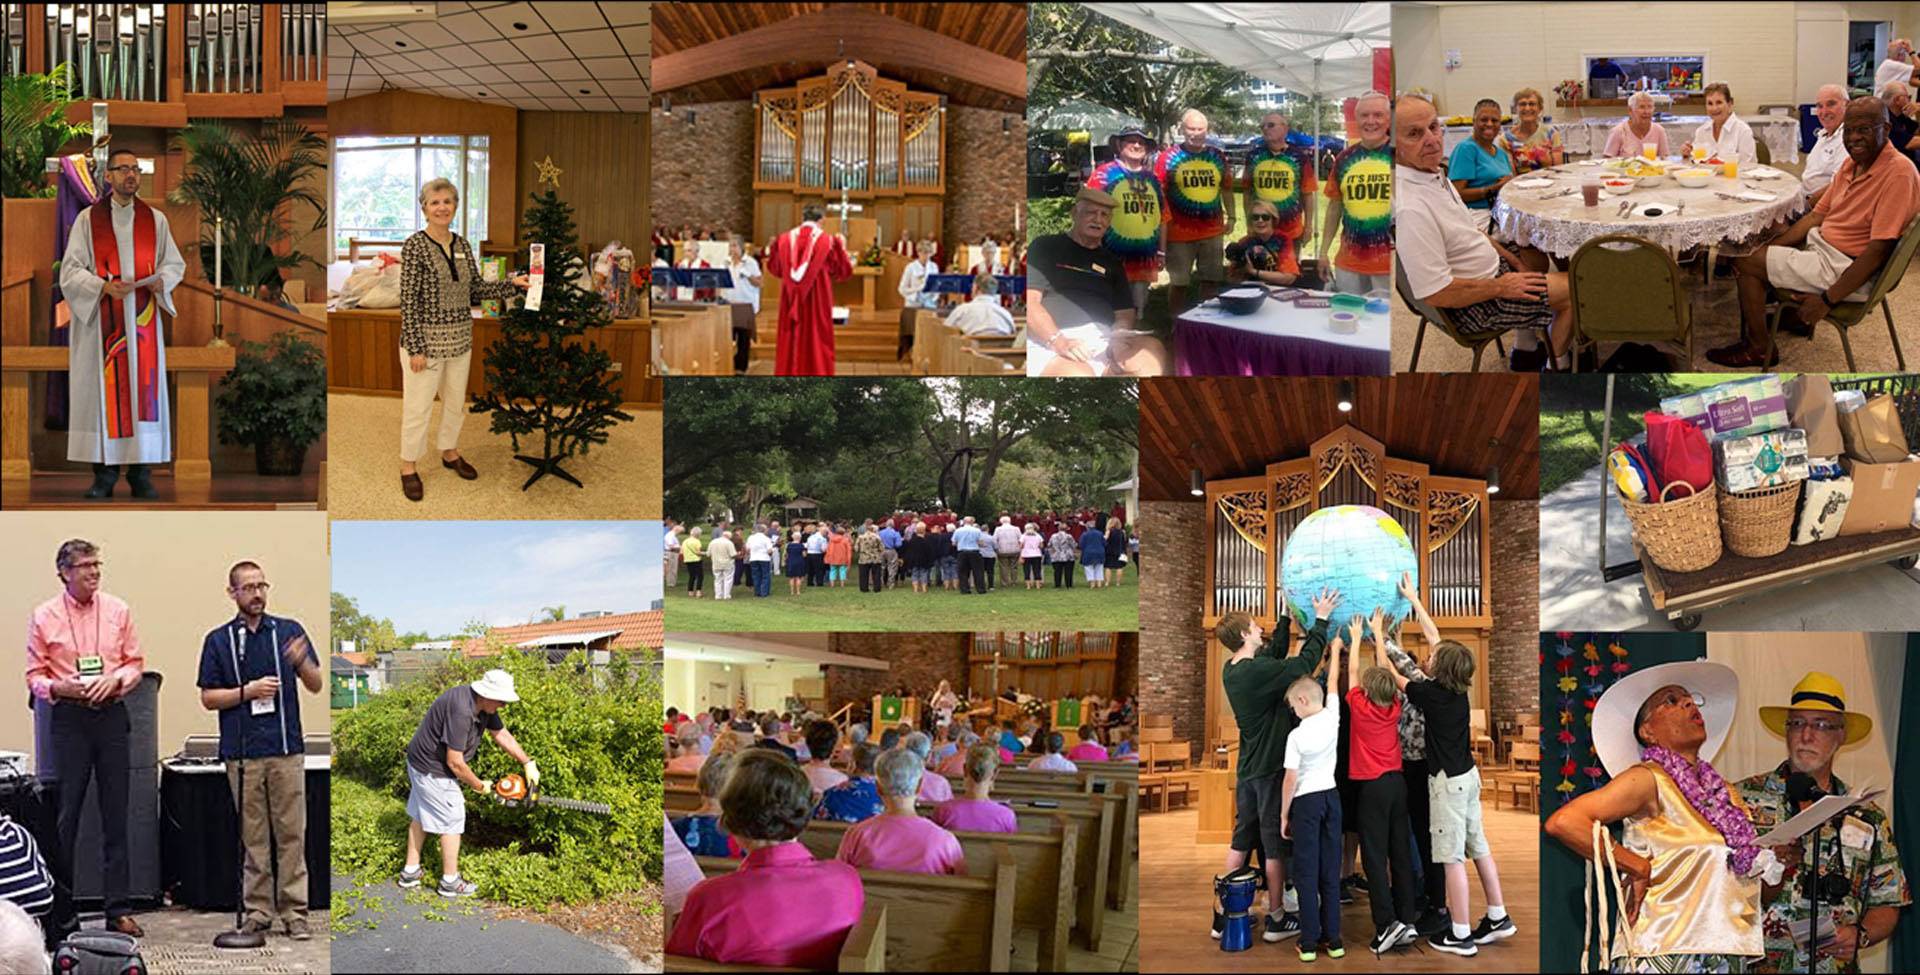 Collage of members and various activities at First Congregational UCC showing our spirit-filled community